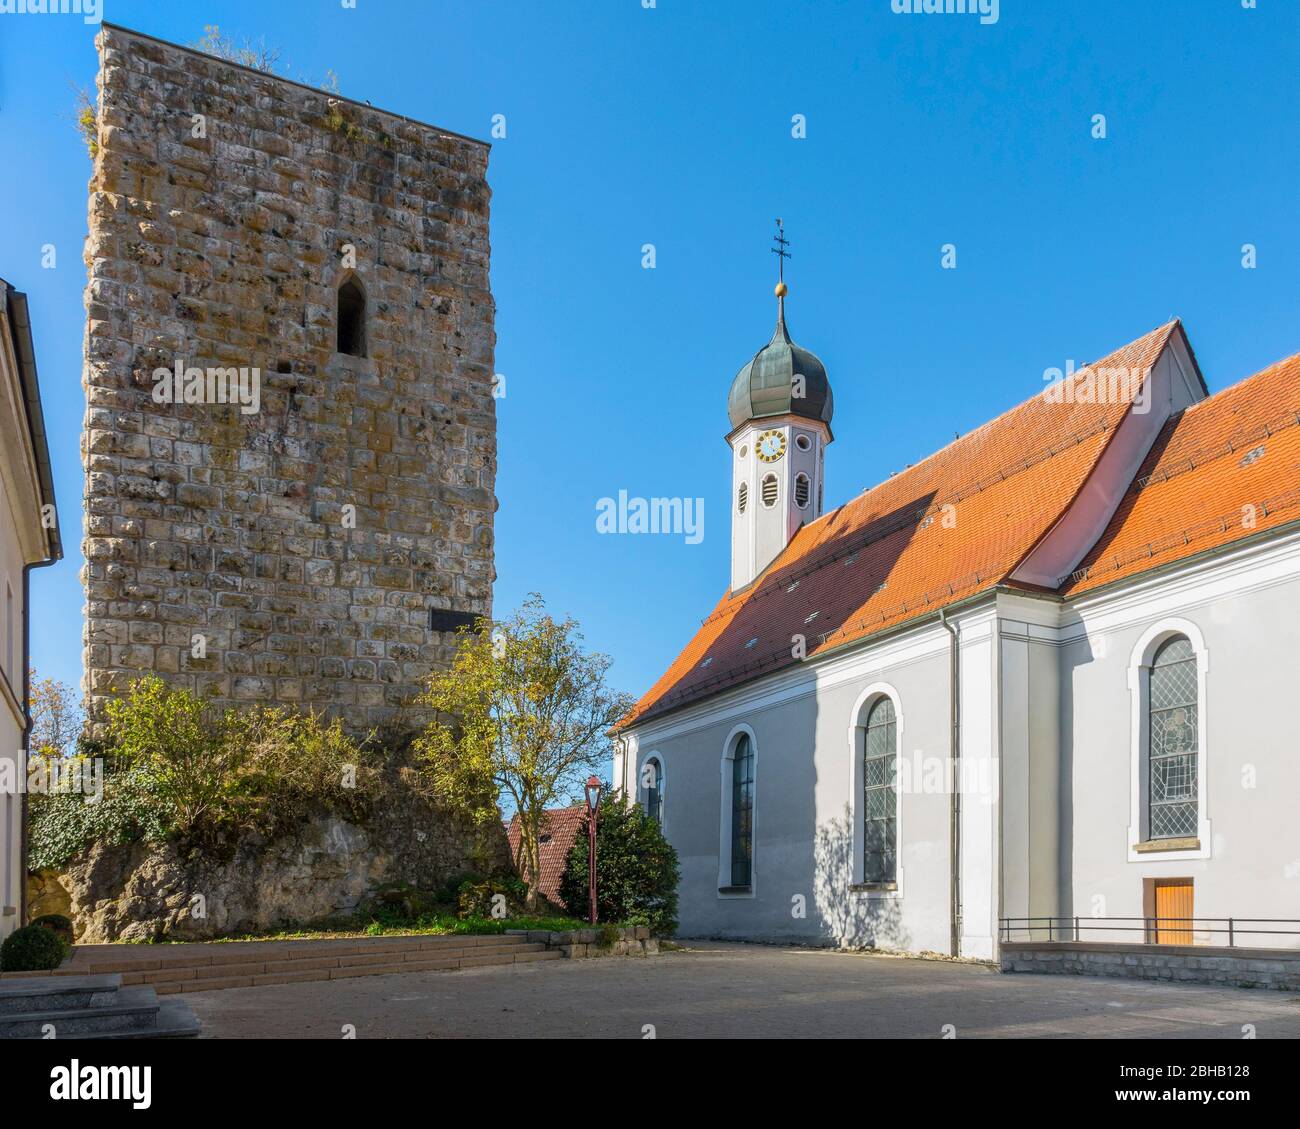 Germany, Baden-Württemberg, Sigmaringen - Jungnau, keep of the former castle Jungnau also called Jungnau Castle, next to the parish church of St. Anna, the keep, was renamed in honor of Emperor Wilhelm II in Kaiser Wilhelm tower. Stock Photo